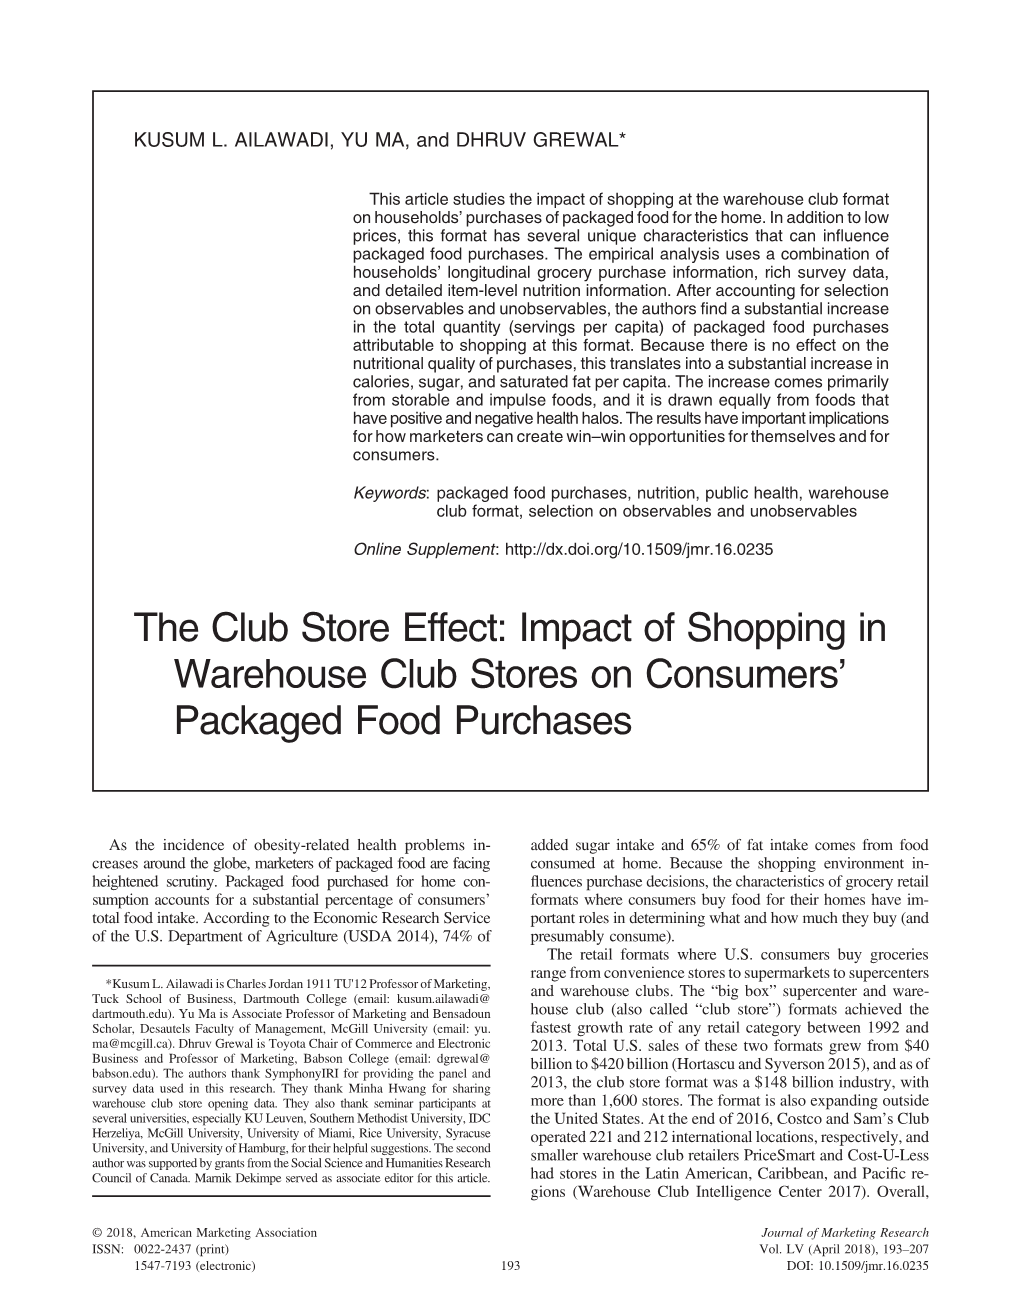 Impact of Shopping in Warehouse Club Stores on Consumers’ Packaged Food Purchases